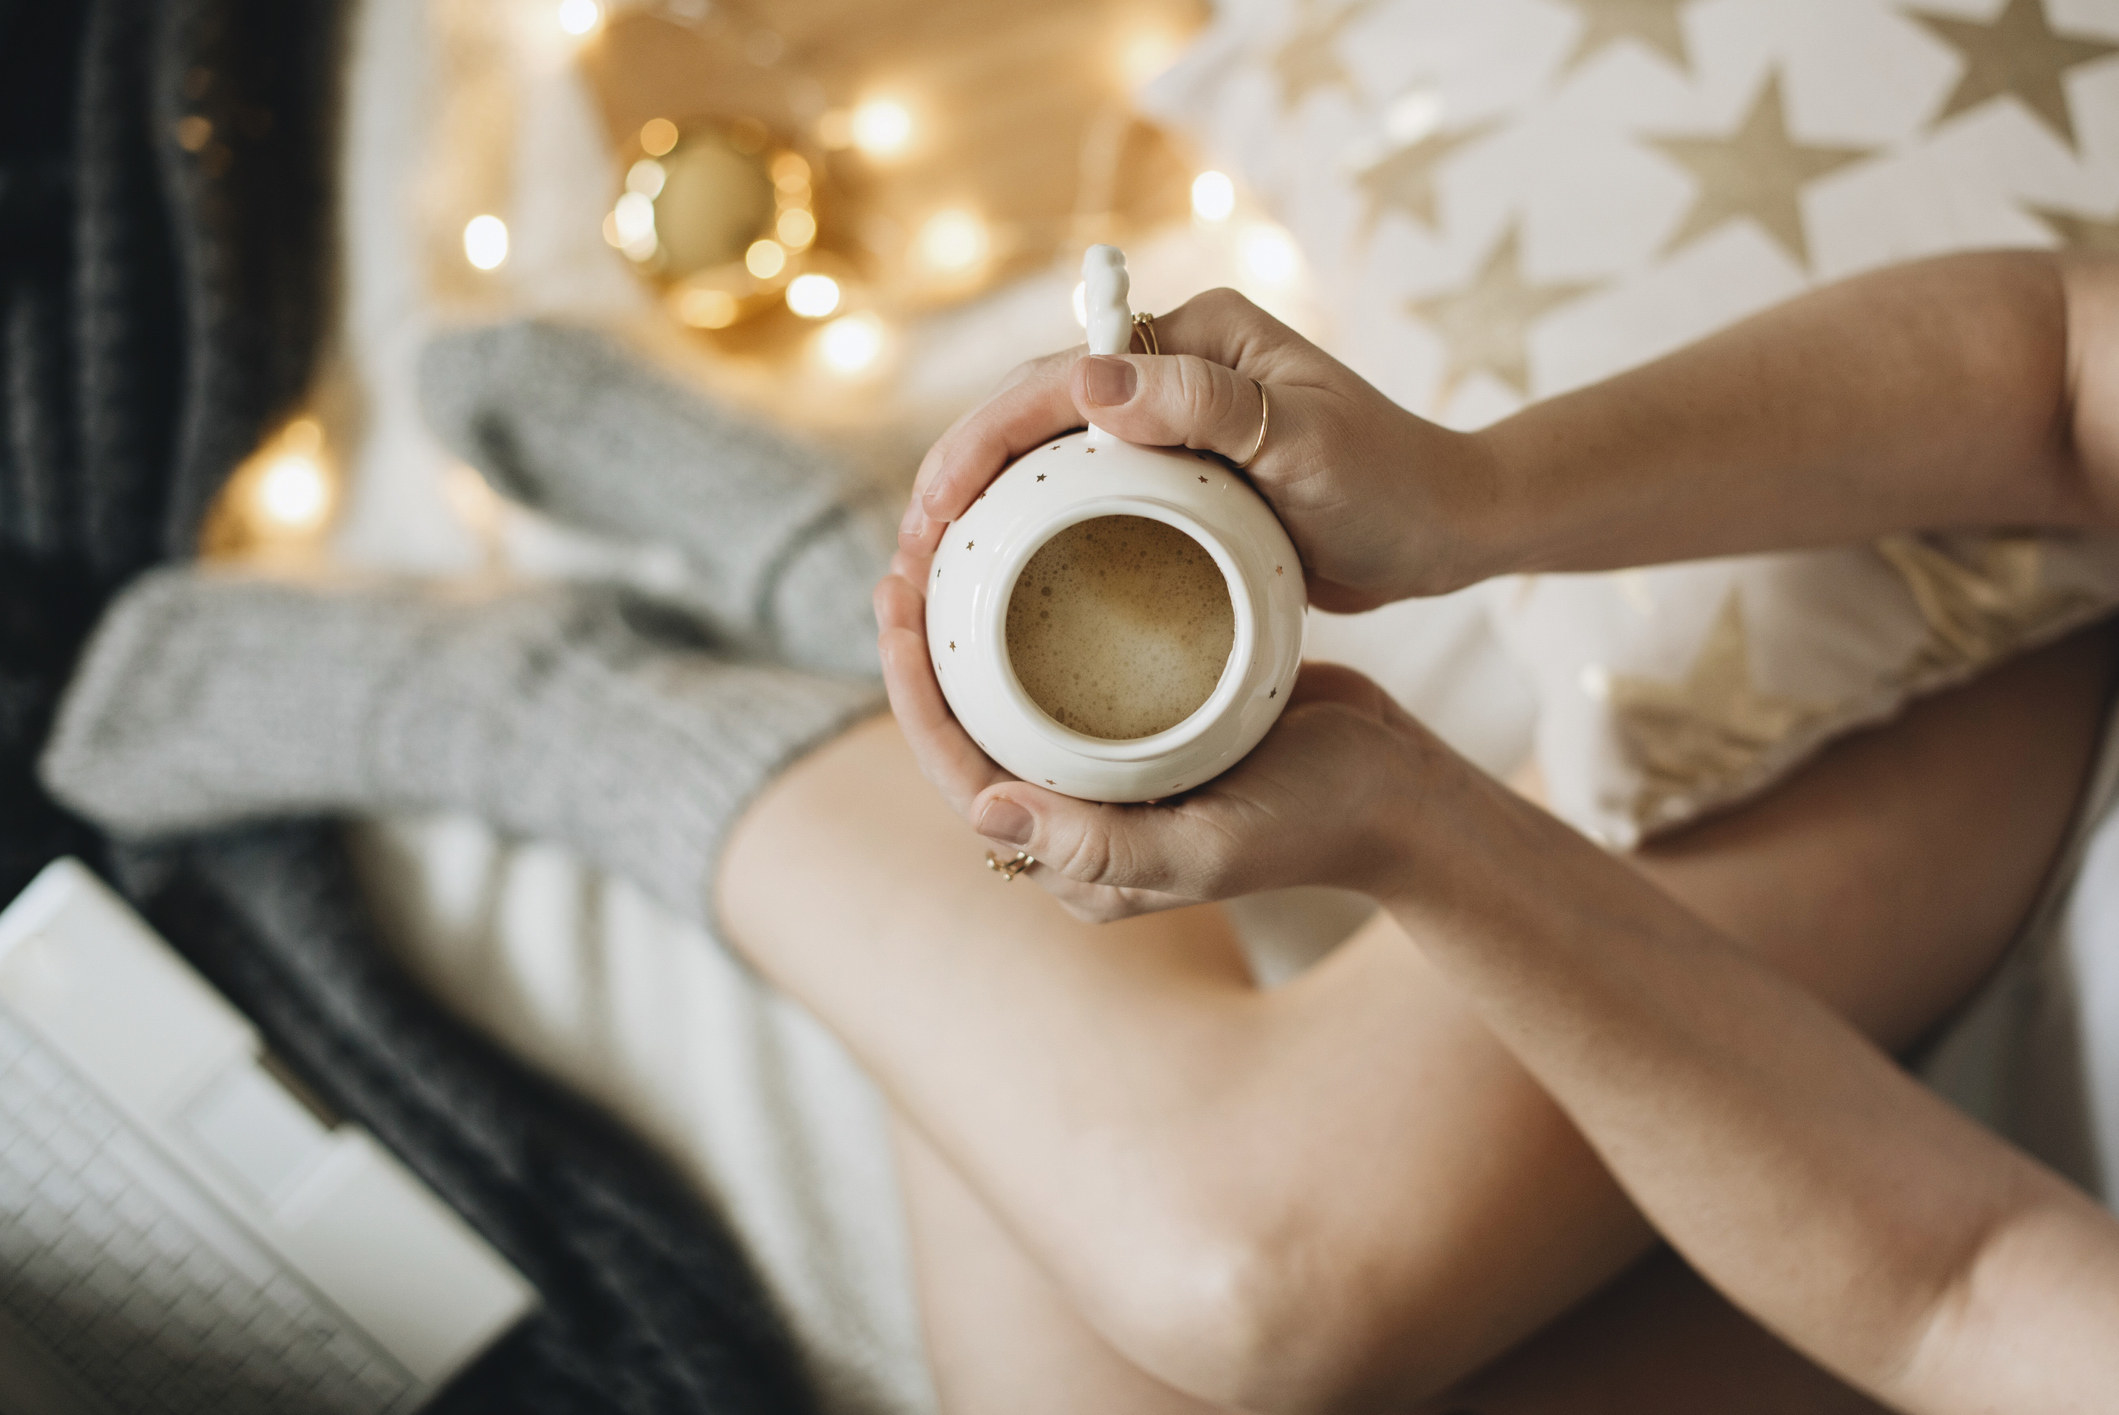 A girl holding a mug of coffee in bed.